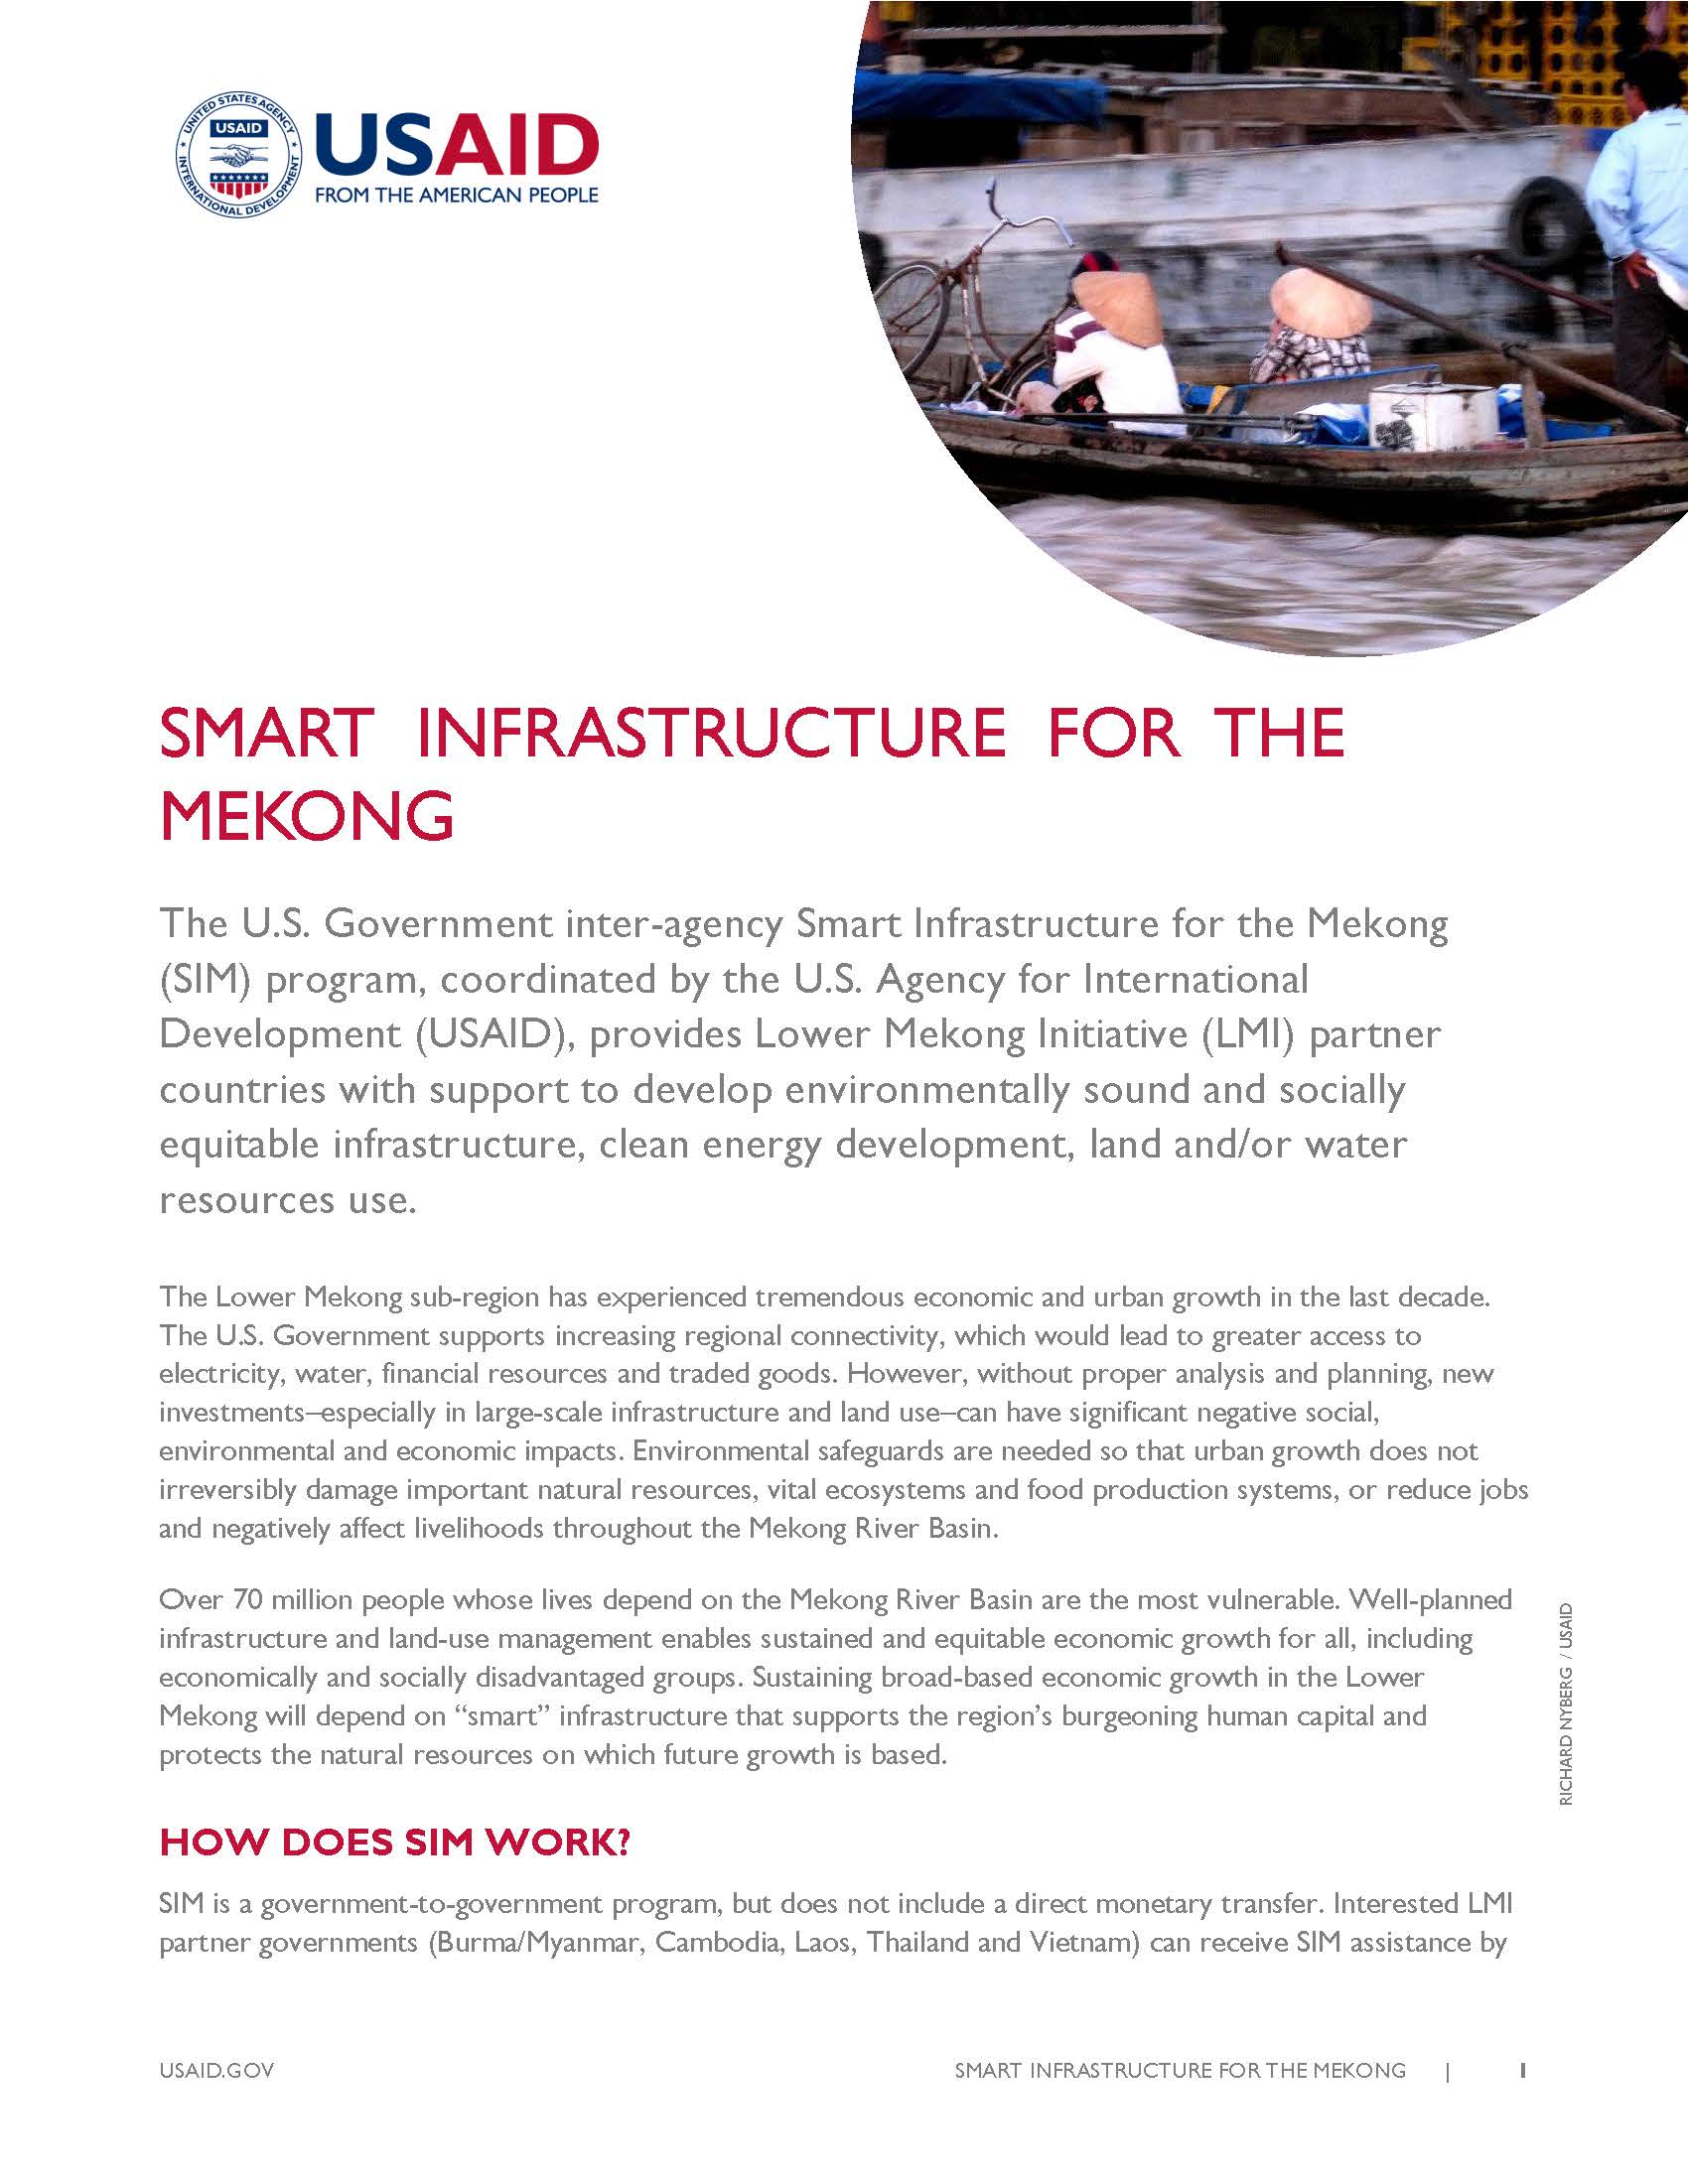 Smart Infrastructure for the Mekong (SIM)